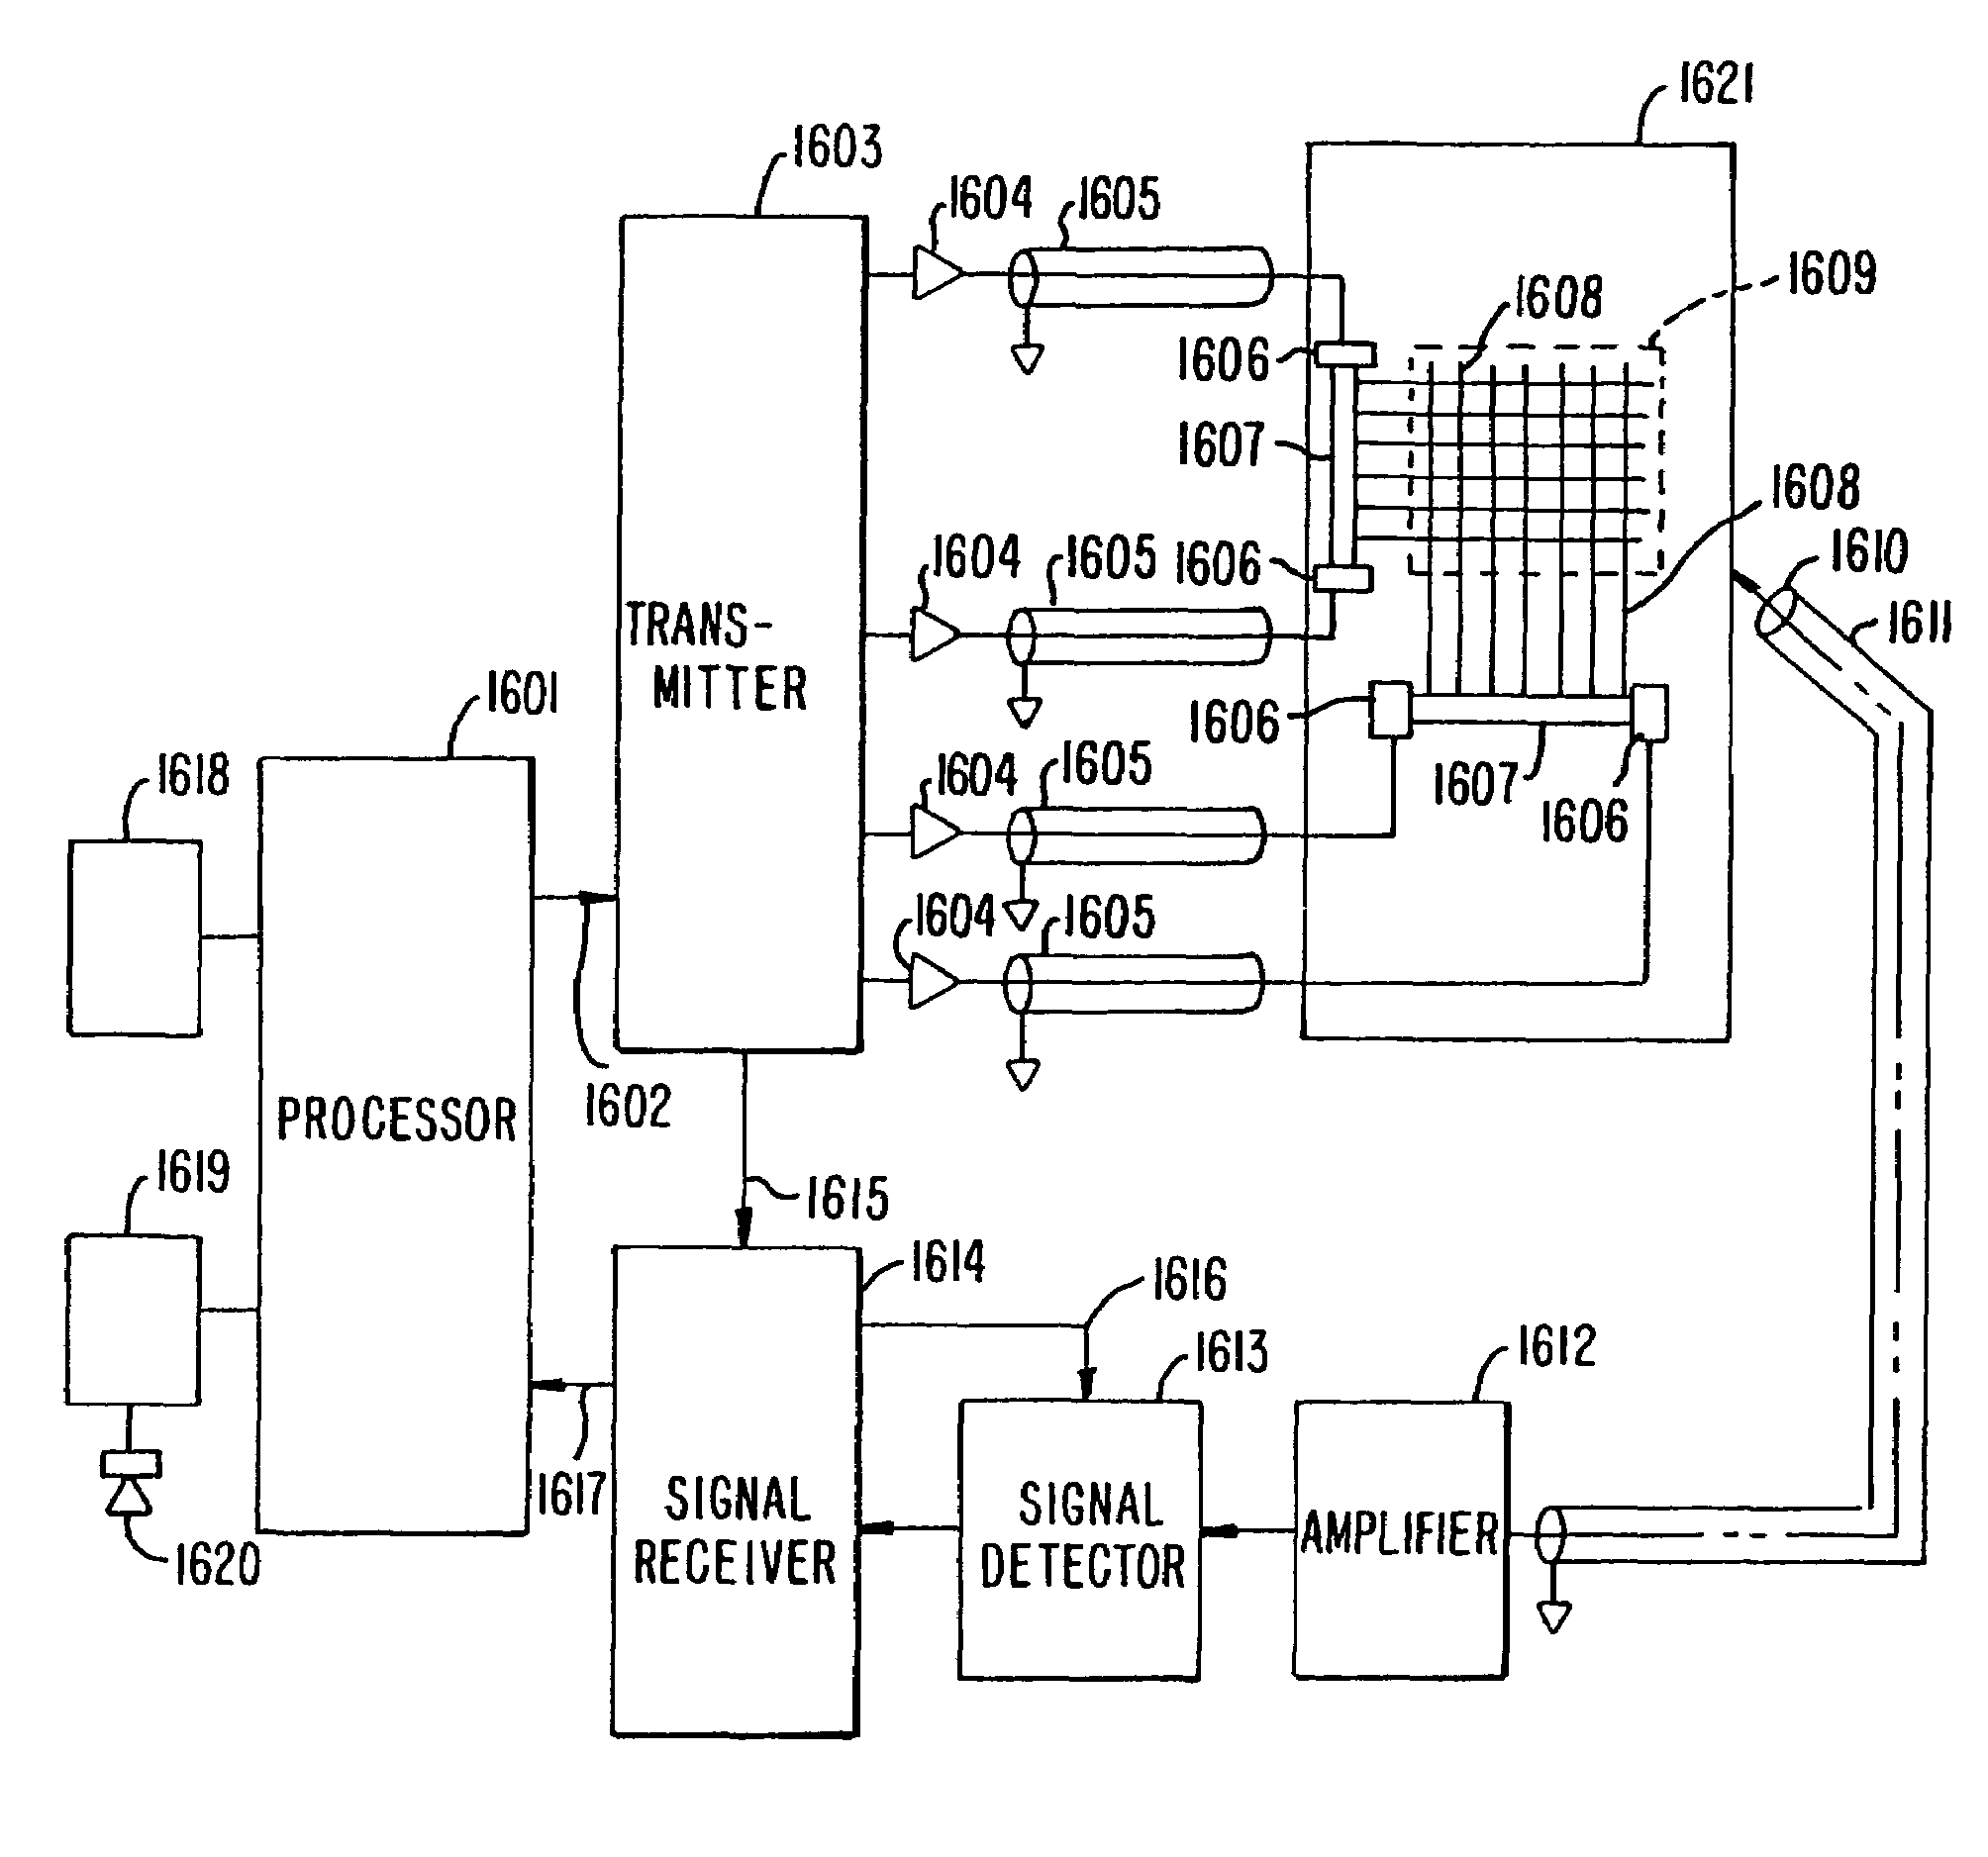 Electrographic position location apparatus and method